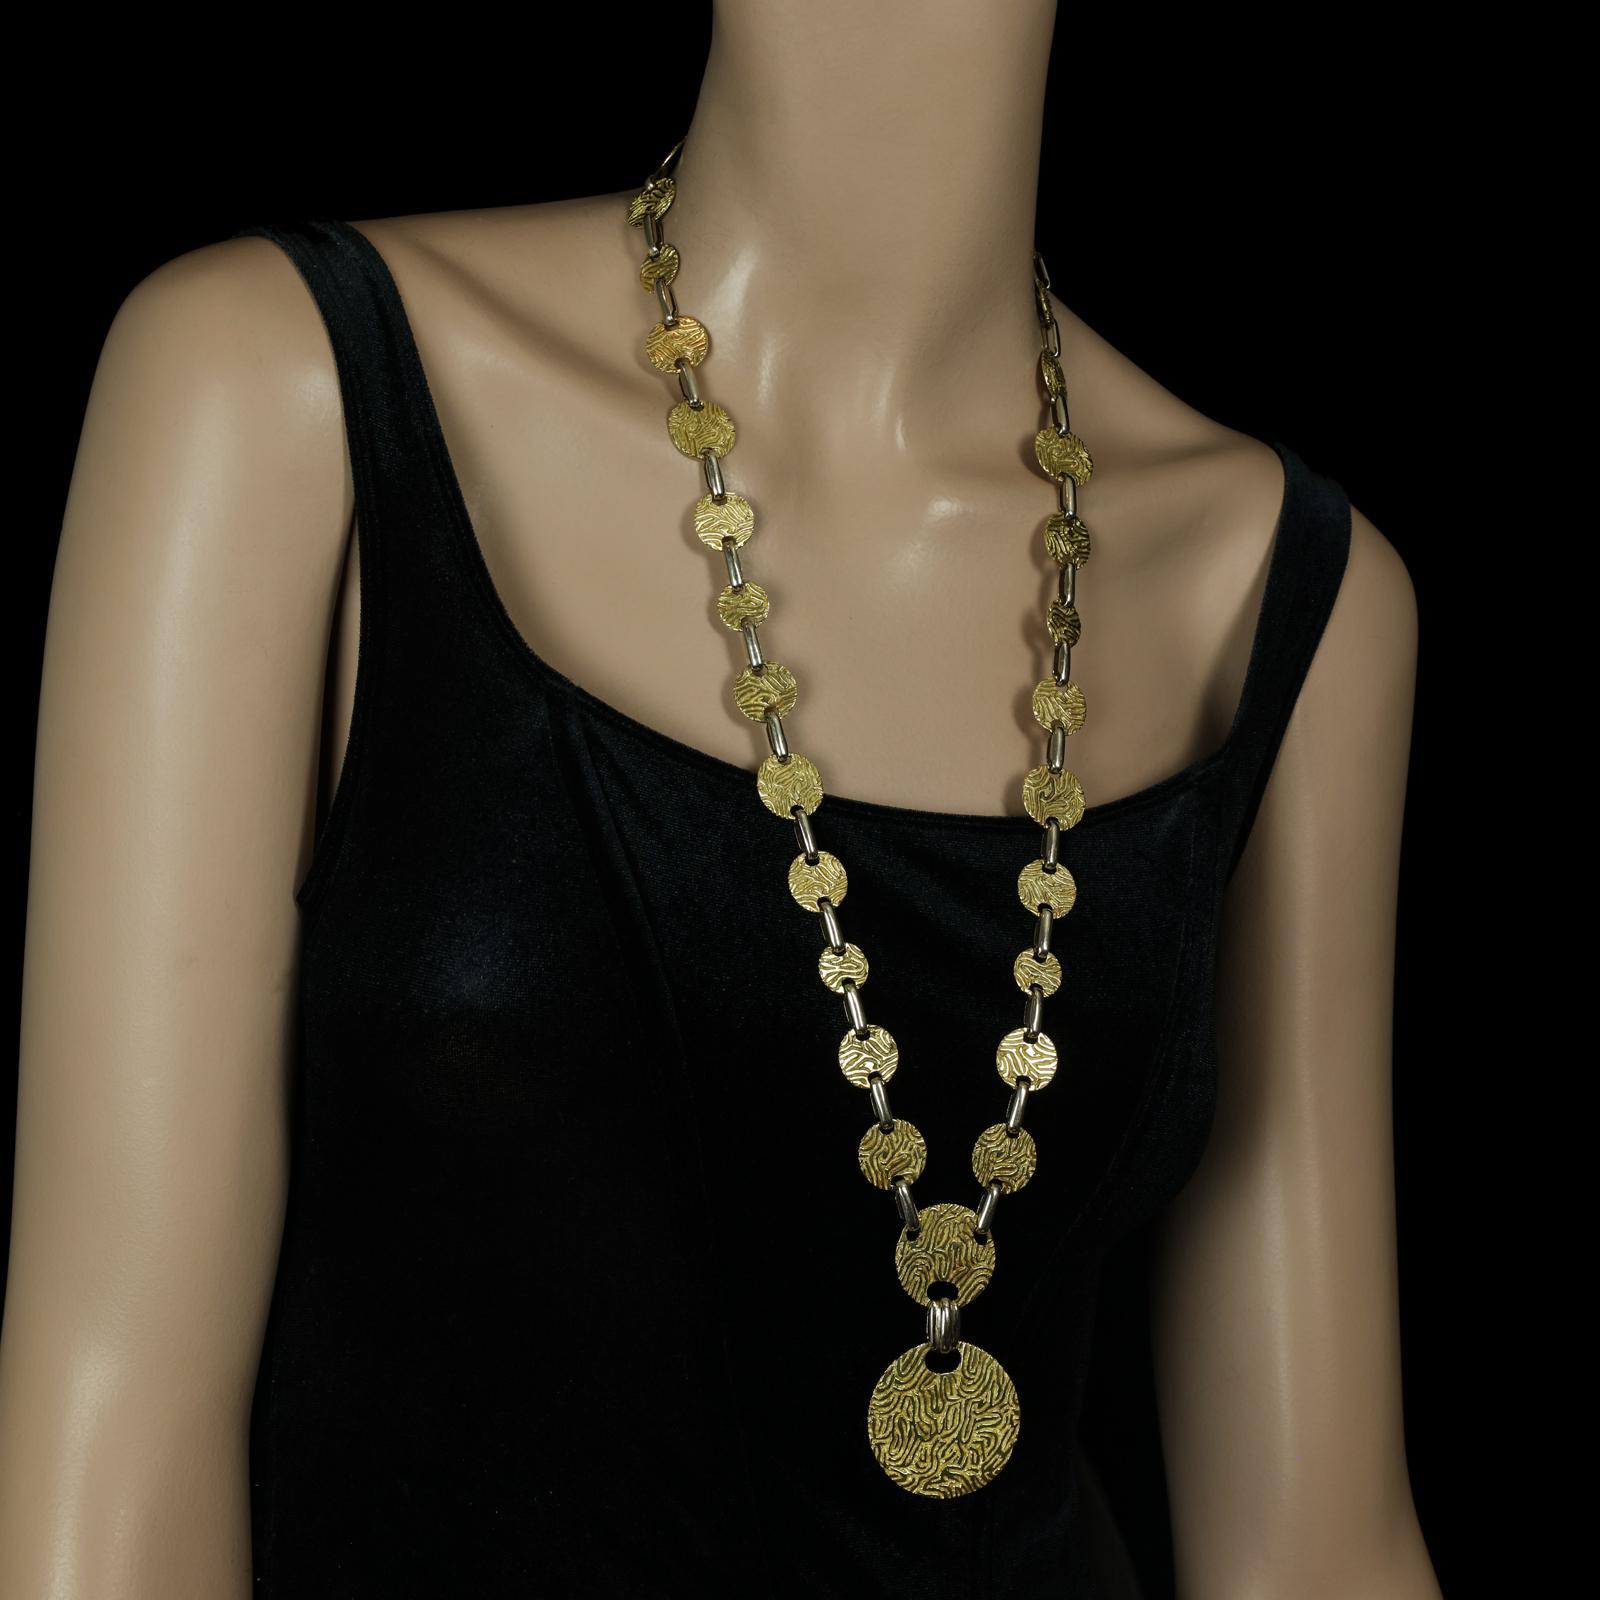 A bold long sautoir necklace by Cartier c.1960s composed of thirty circular discs of 18ct yellow gold with heavily textured abstract pattern on one side, the reverse plain polished, joined by uniform oblong white gold links, the centre hung with two